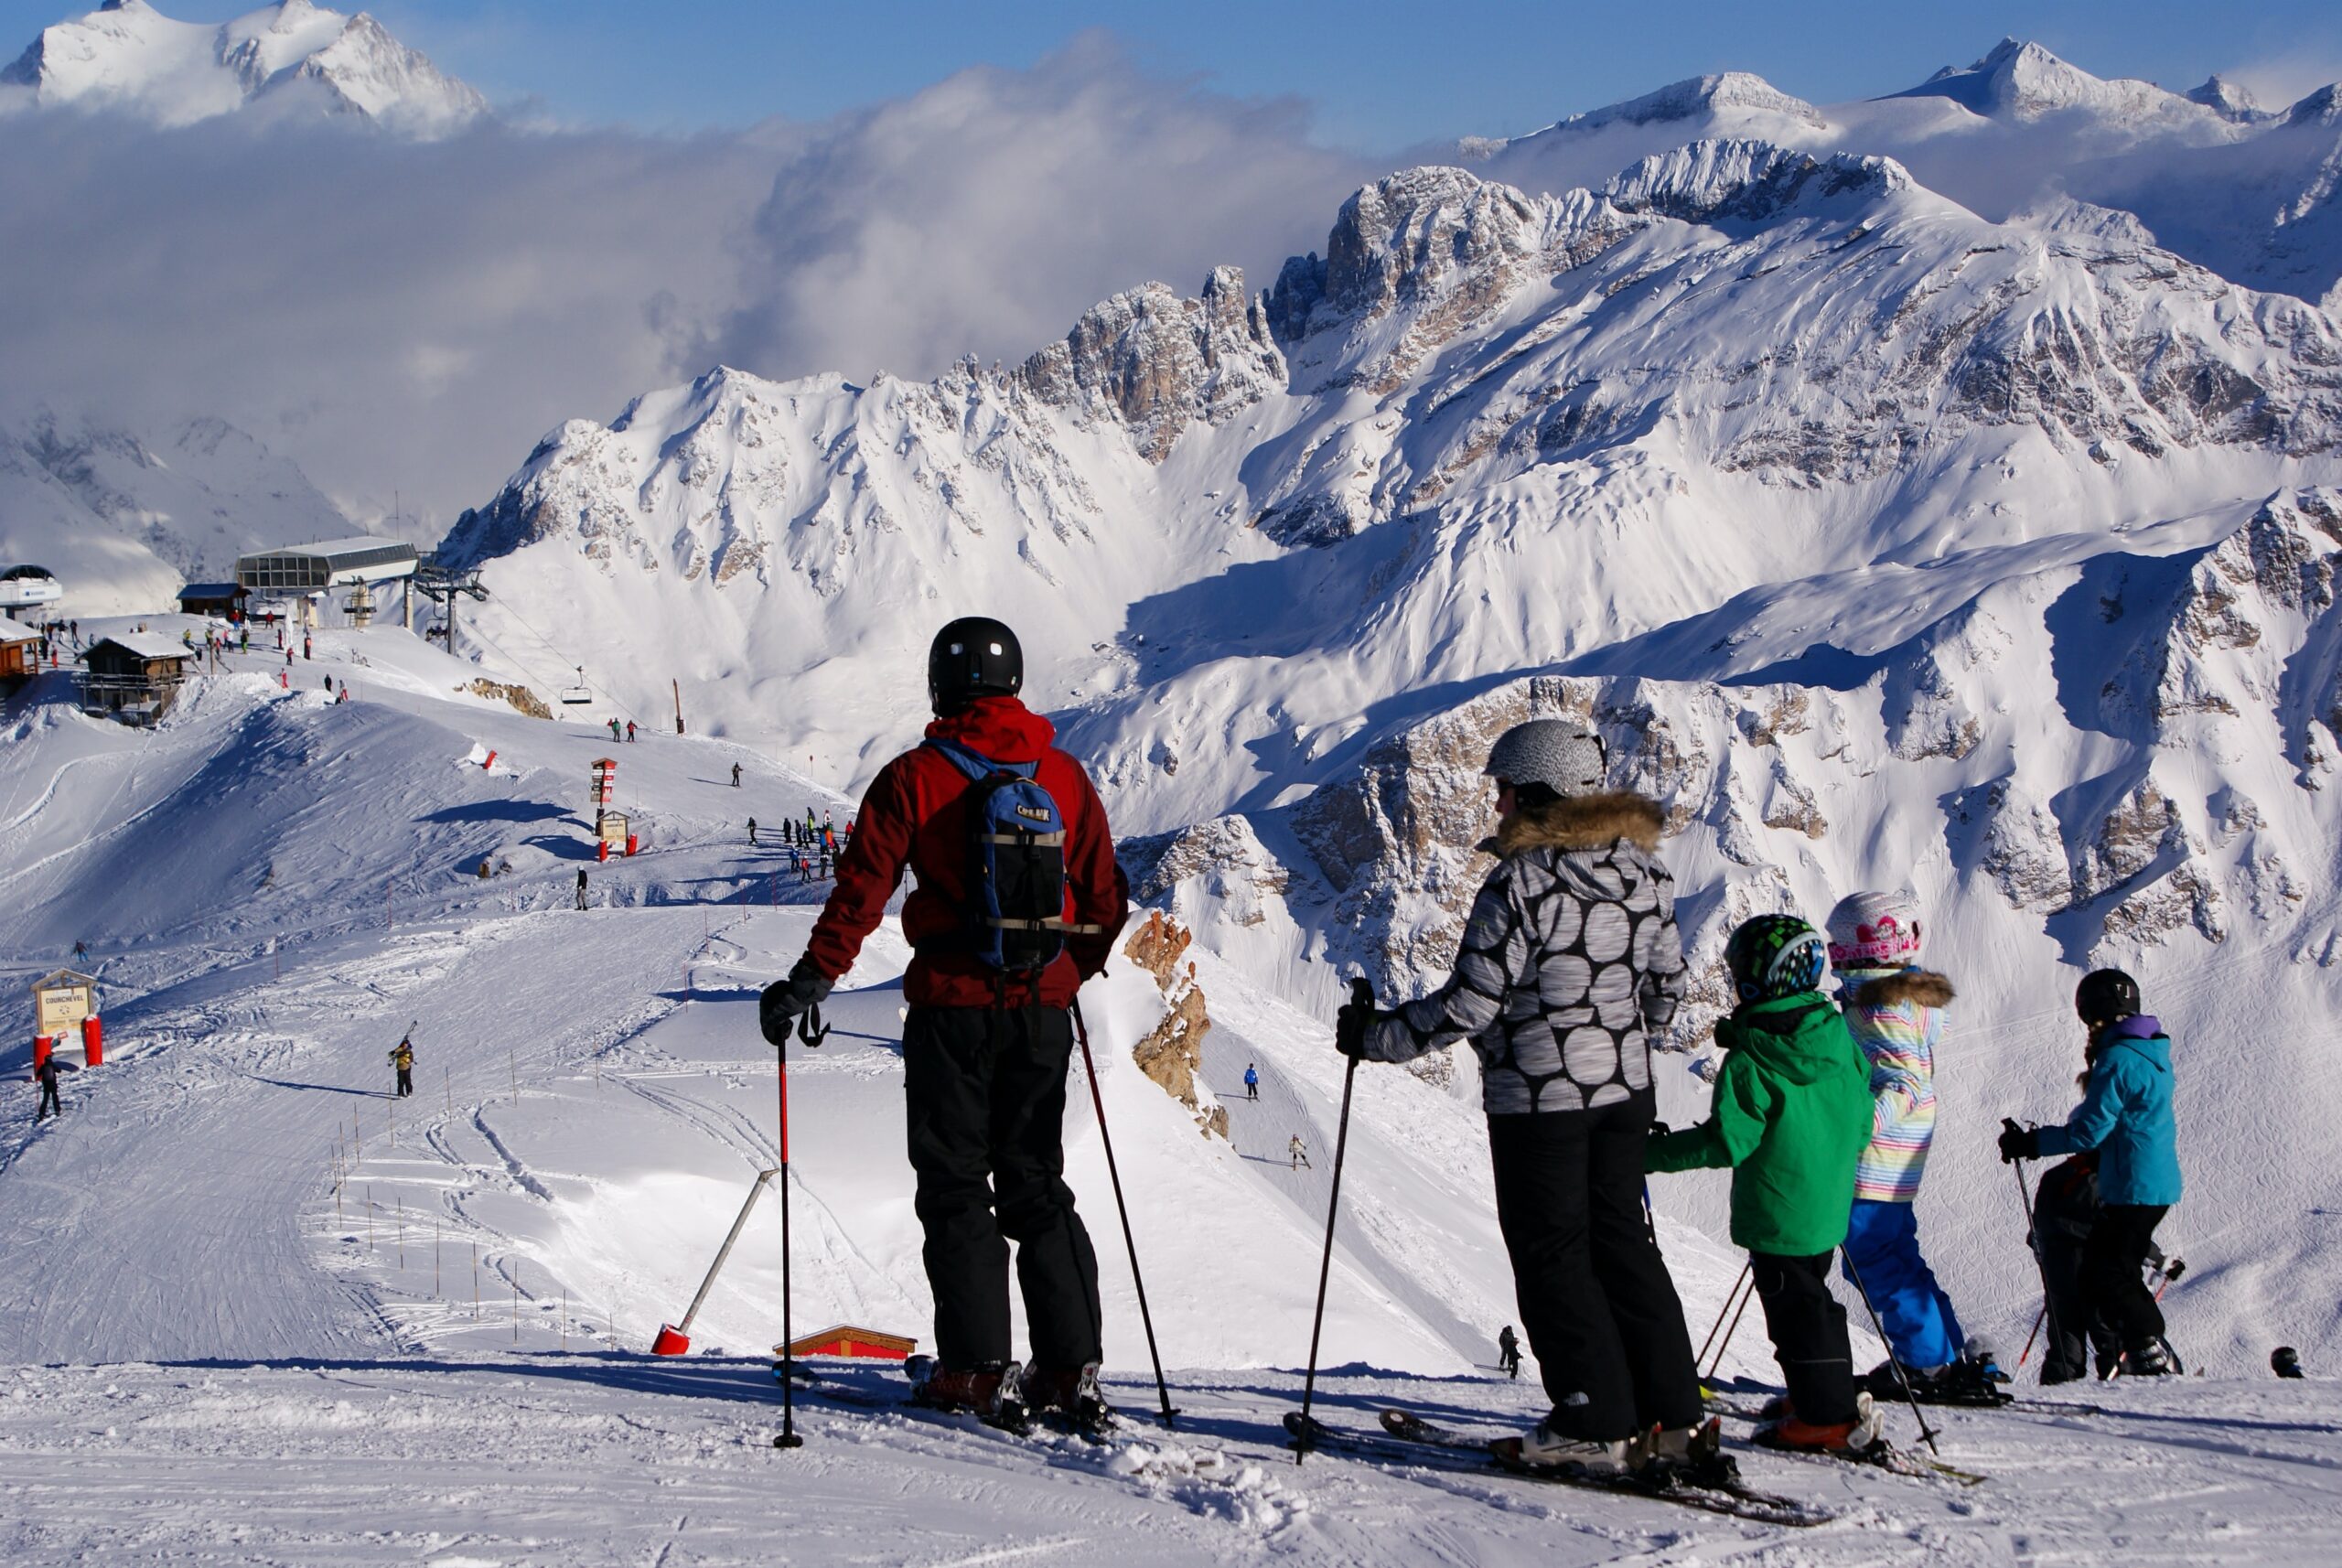 Where is the poshest place to ski in France?